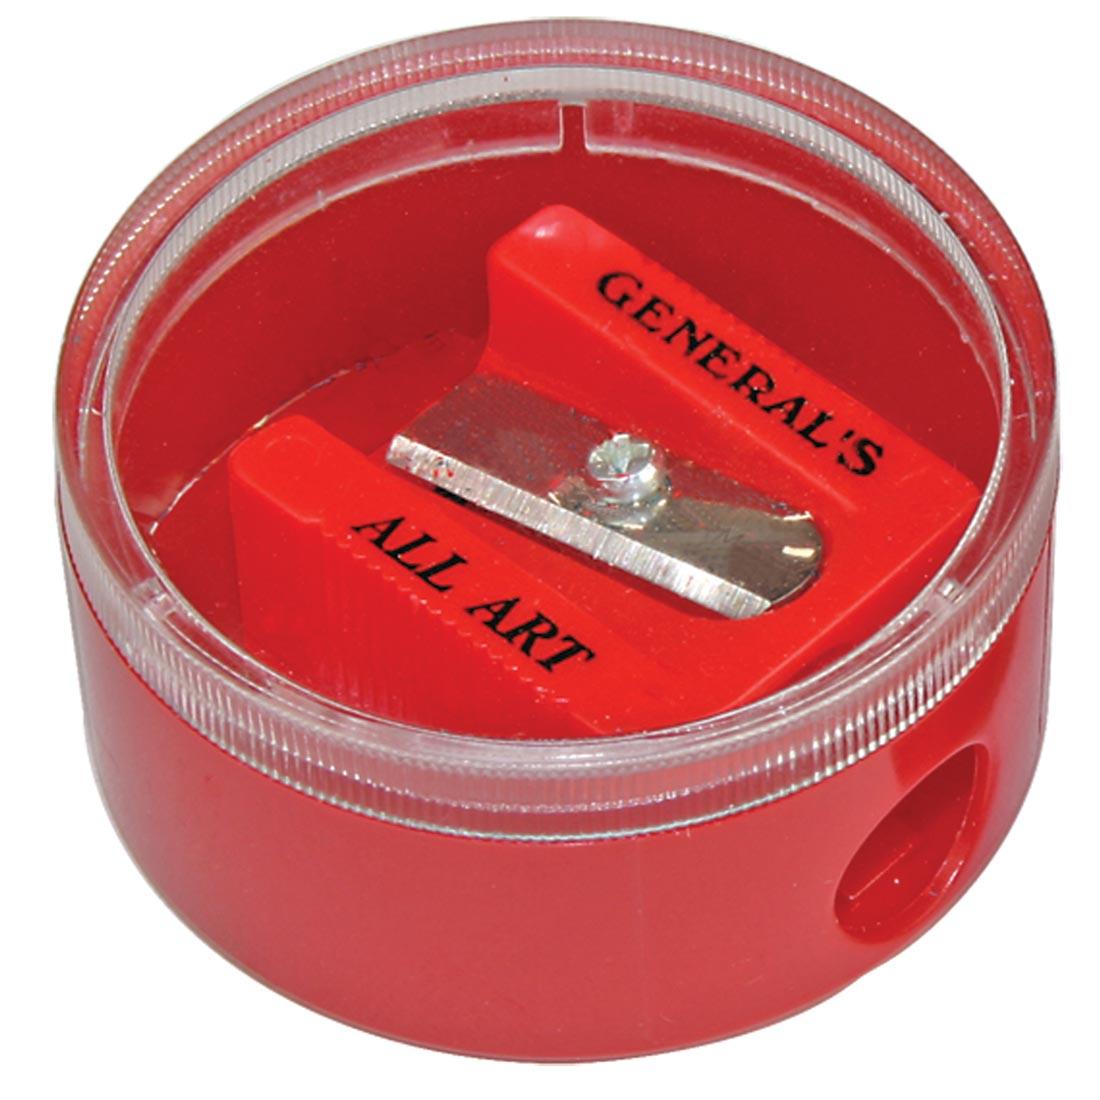 General's Little Red All-Art Pencil Canister Sharpener